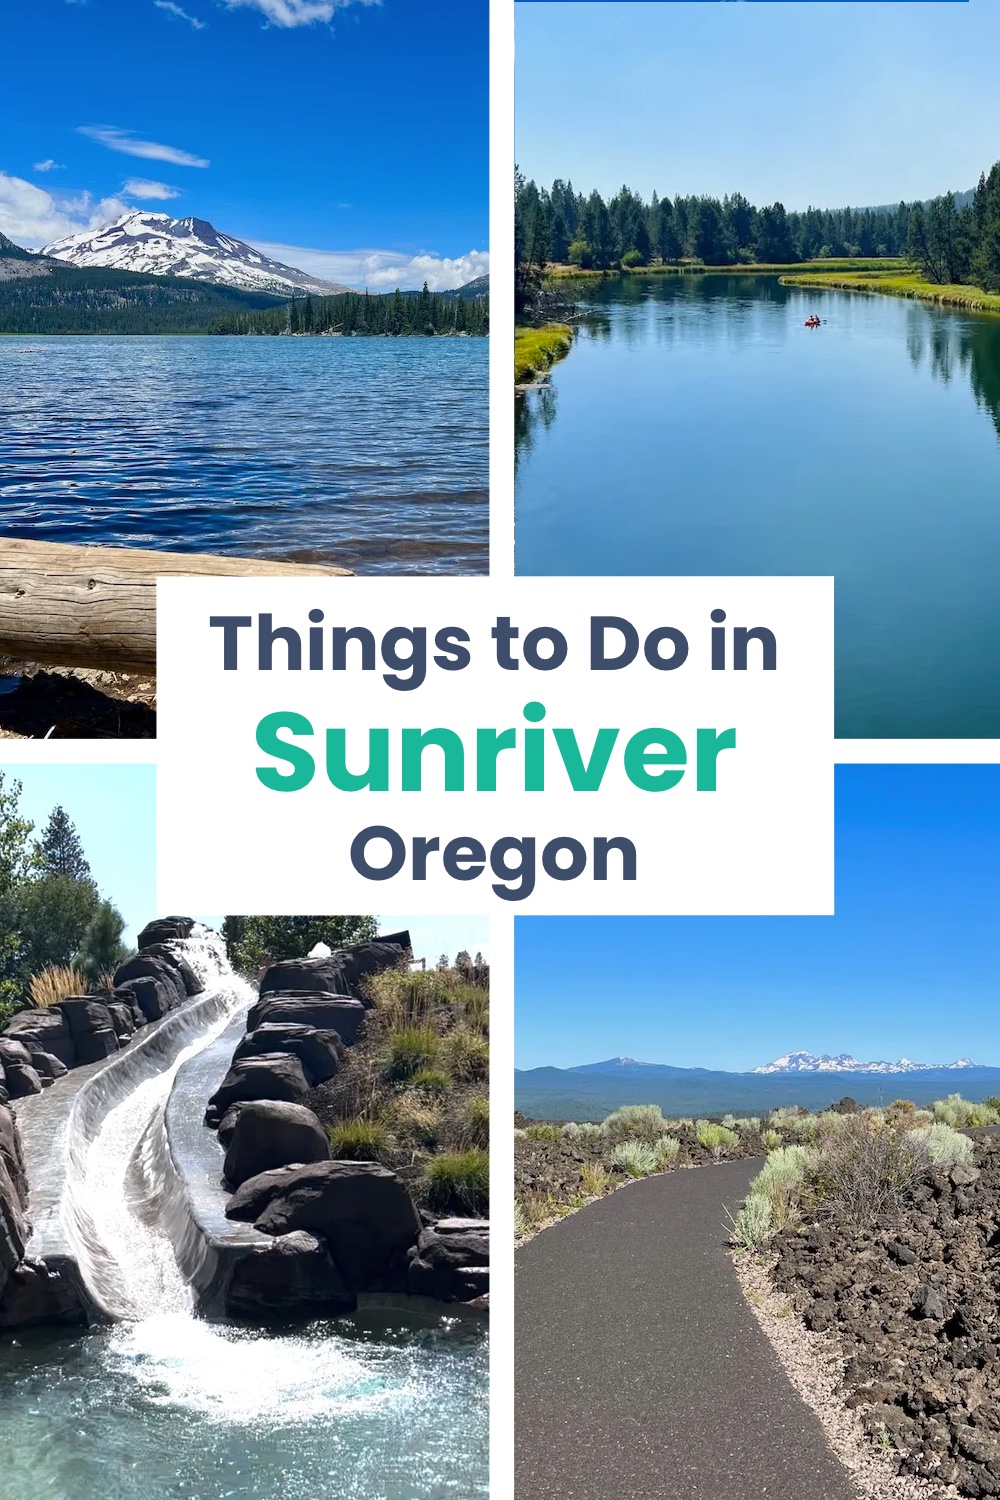 Things to do in Sunriver